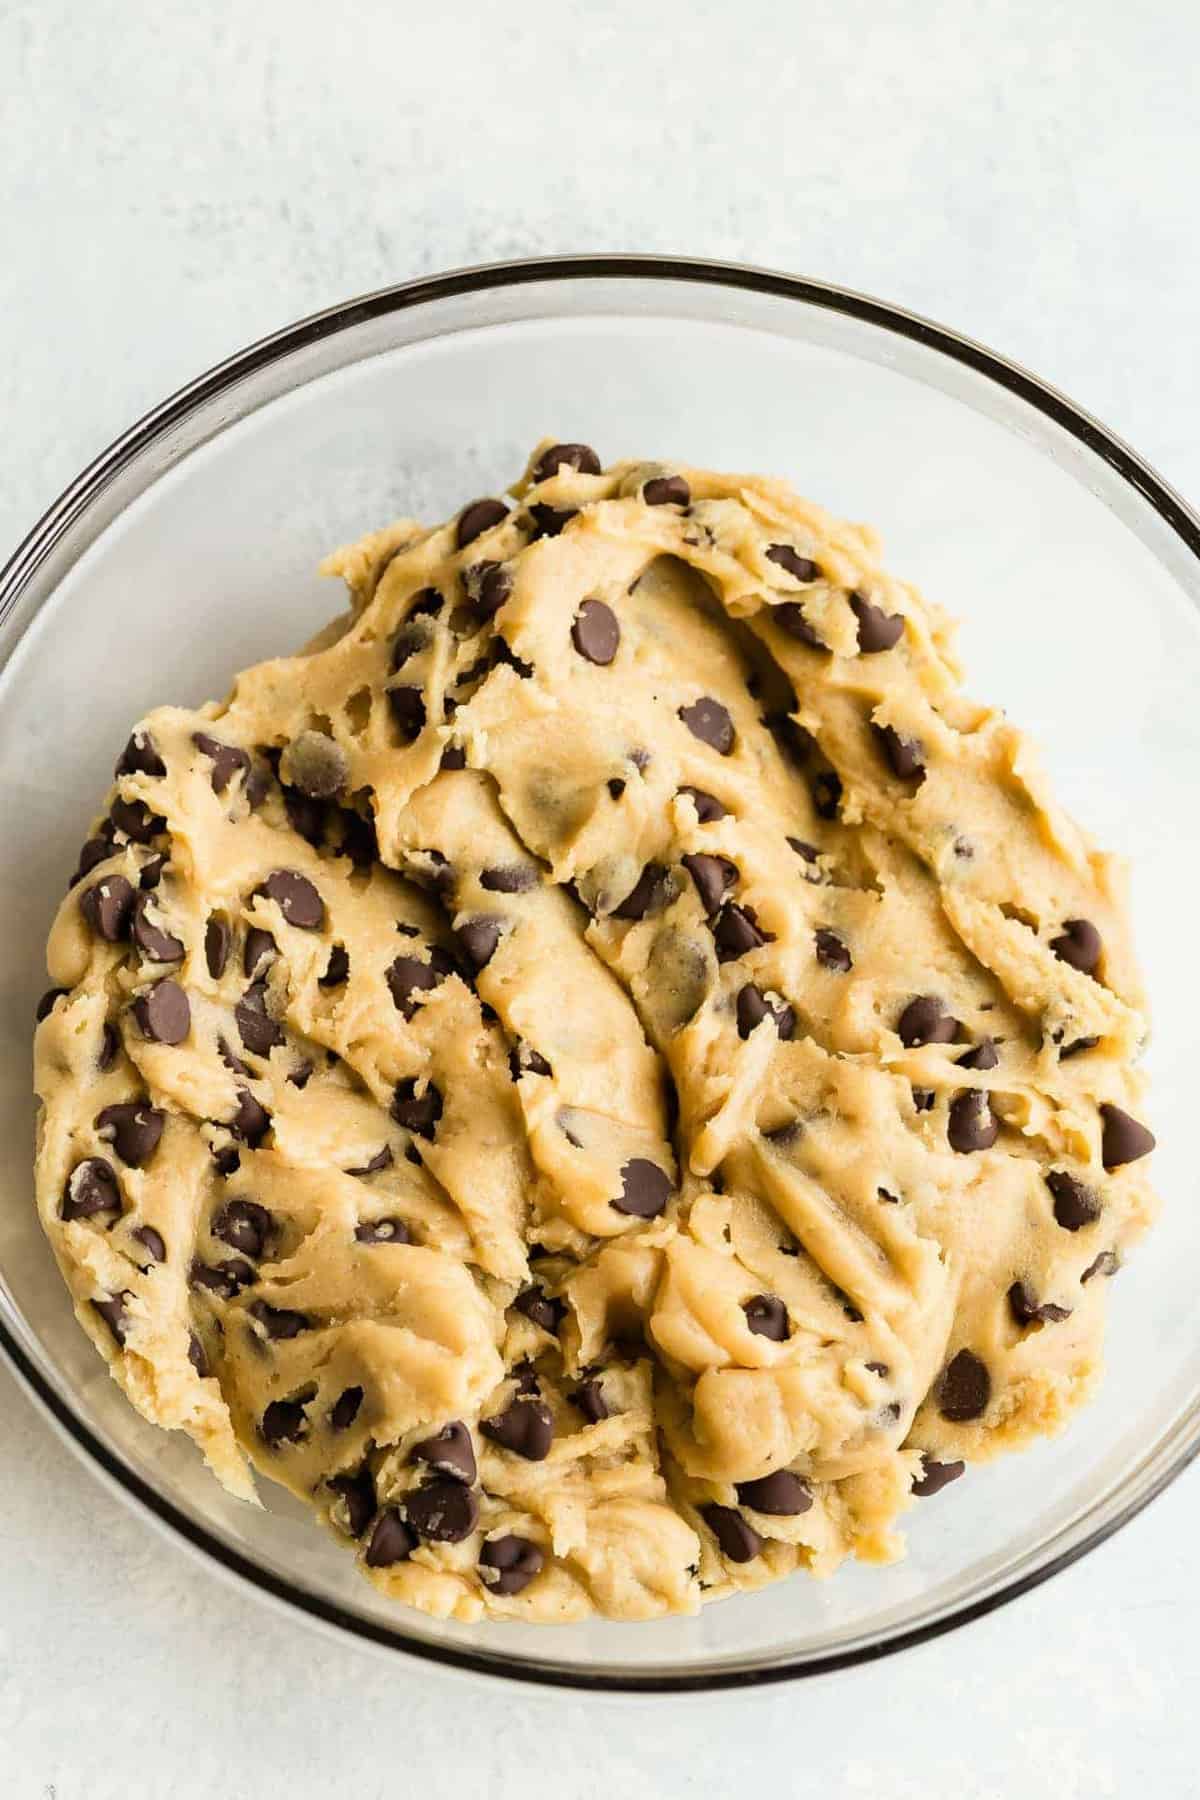 Chewy chocolate chip cookie dough in a glass bowl.